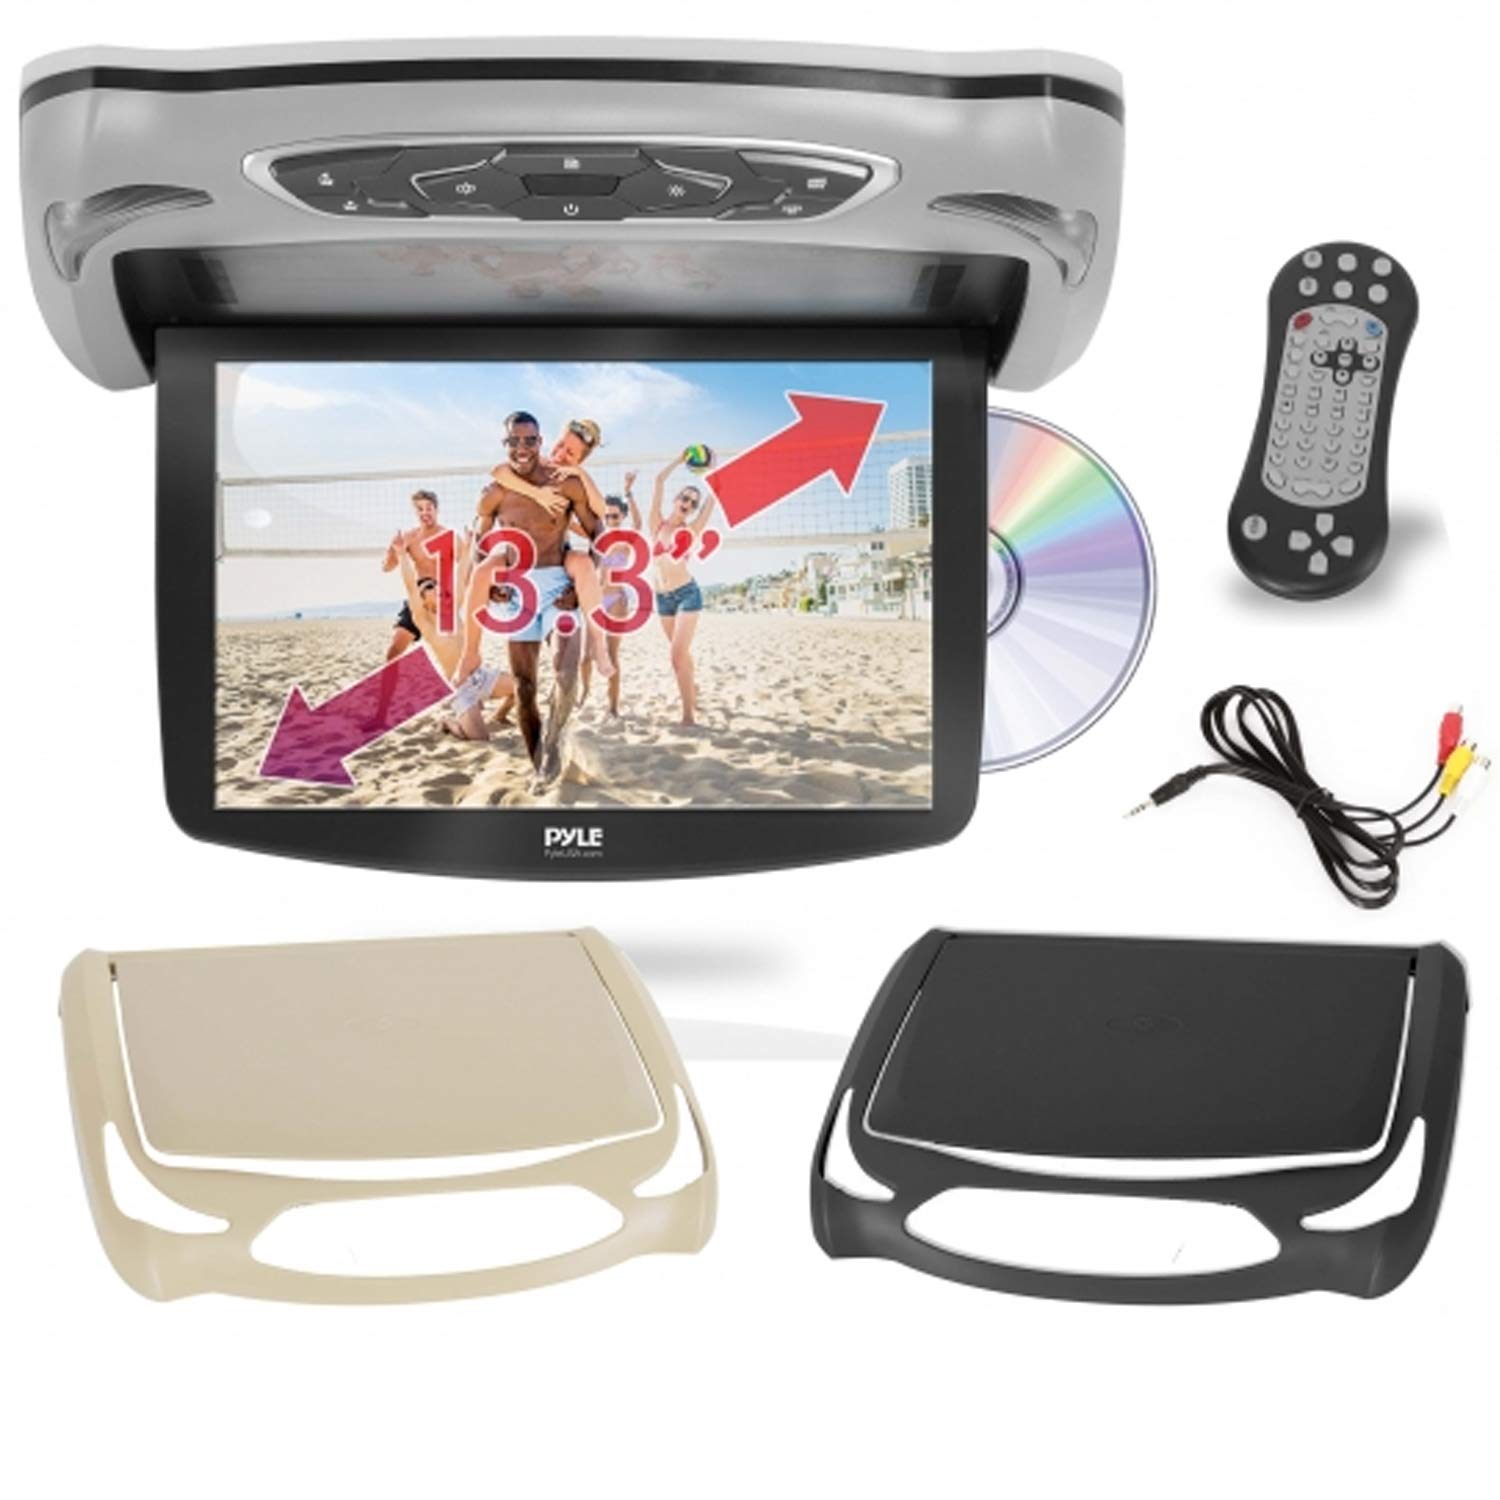 Pyle Car Roof Mount DVD Player Monitor 13.3 inch Vehicle Flip Down Overhead Screen- HDMI SD USB Card Input with Built-in IR Transmitter for Wireless IR Headphone, 3 Style Colors -  PLRD146